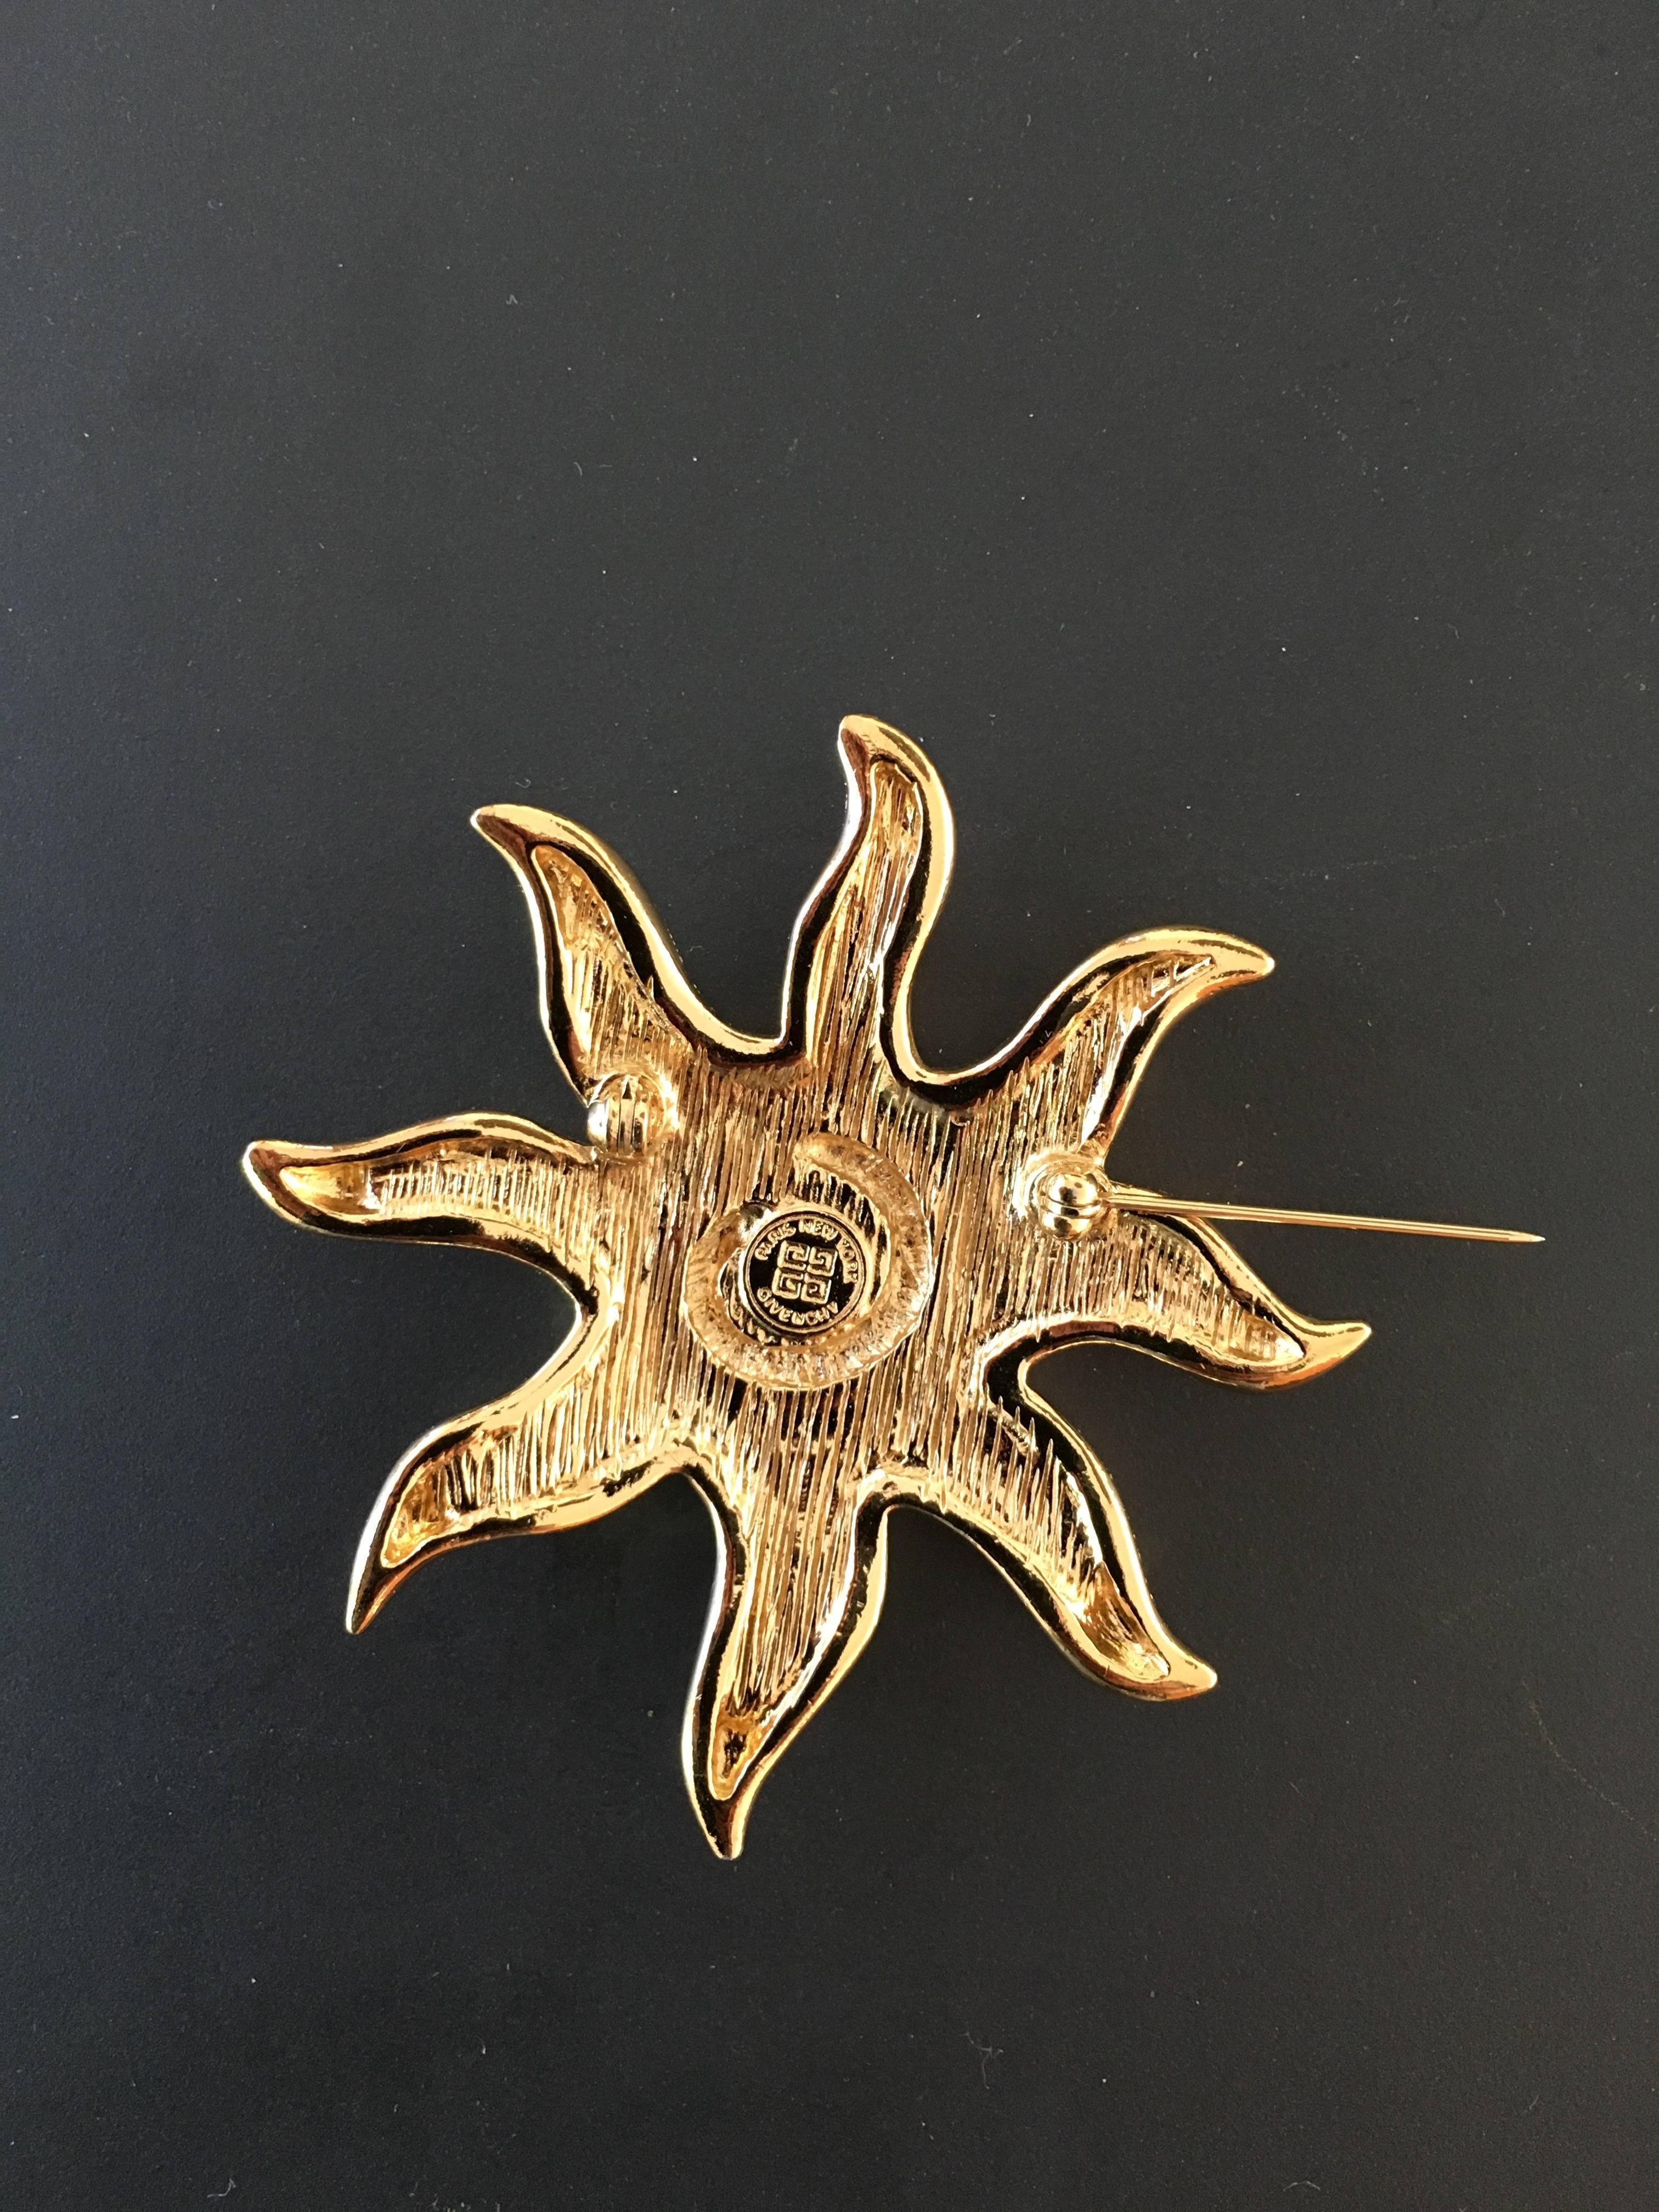 Givenchy gold swirl star pin / brooch. A stylish pin / brooch such as this one can be worn in so many ways...  This whimsical abstract star design is forever chic.
Measurements are:
2.5" diameter.
